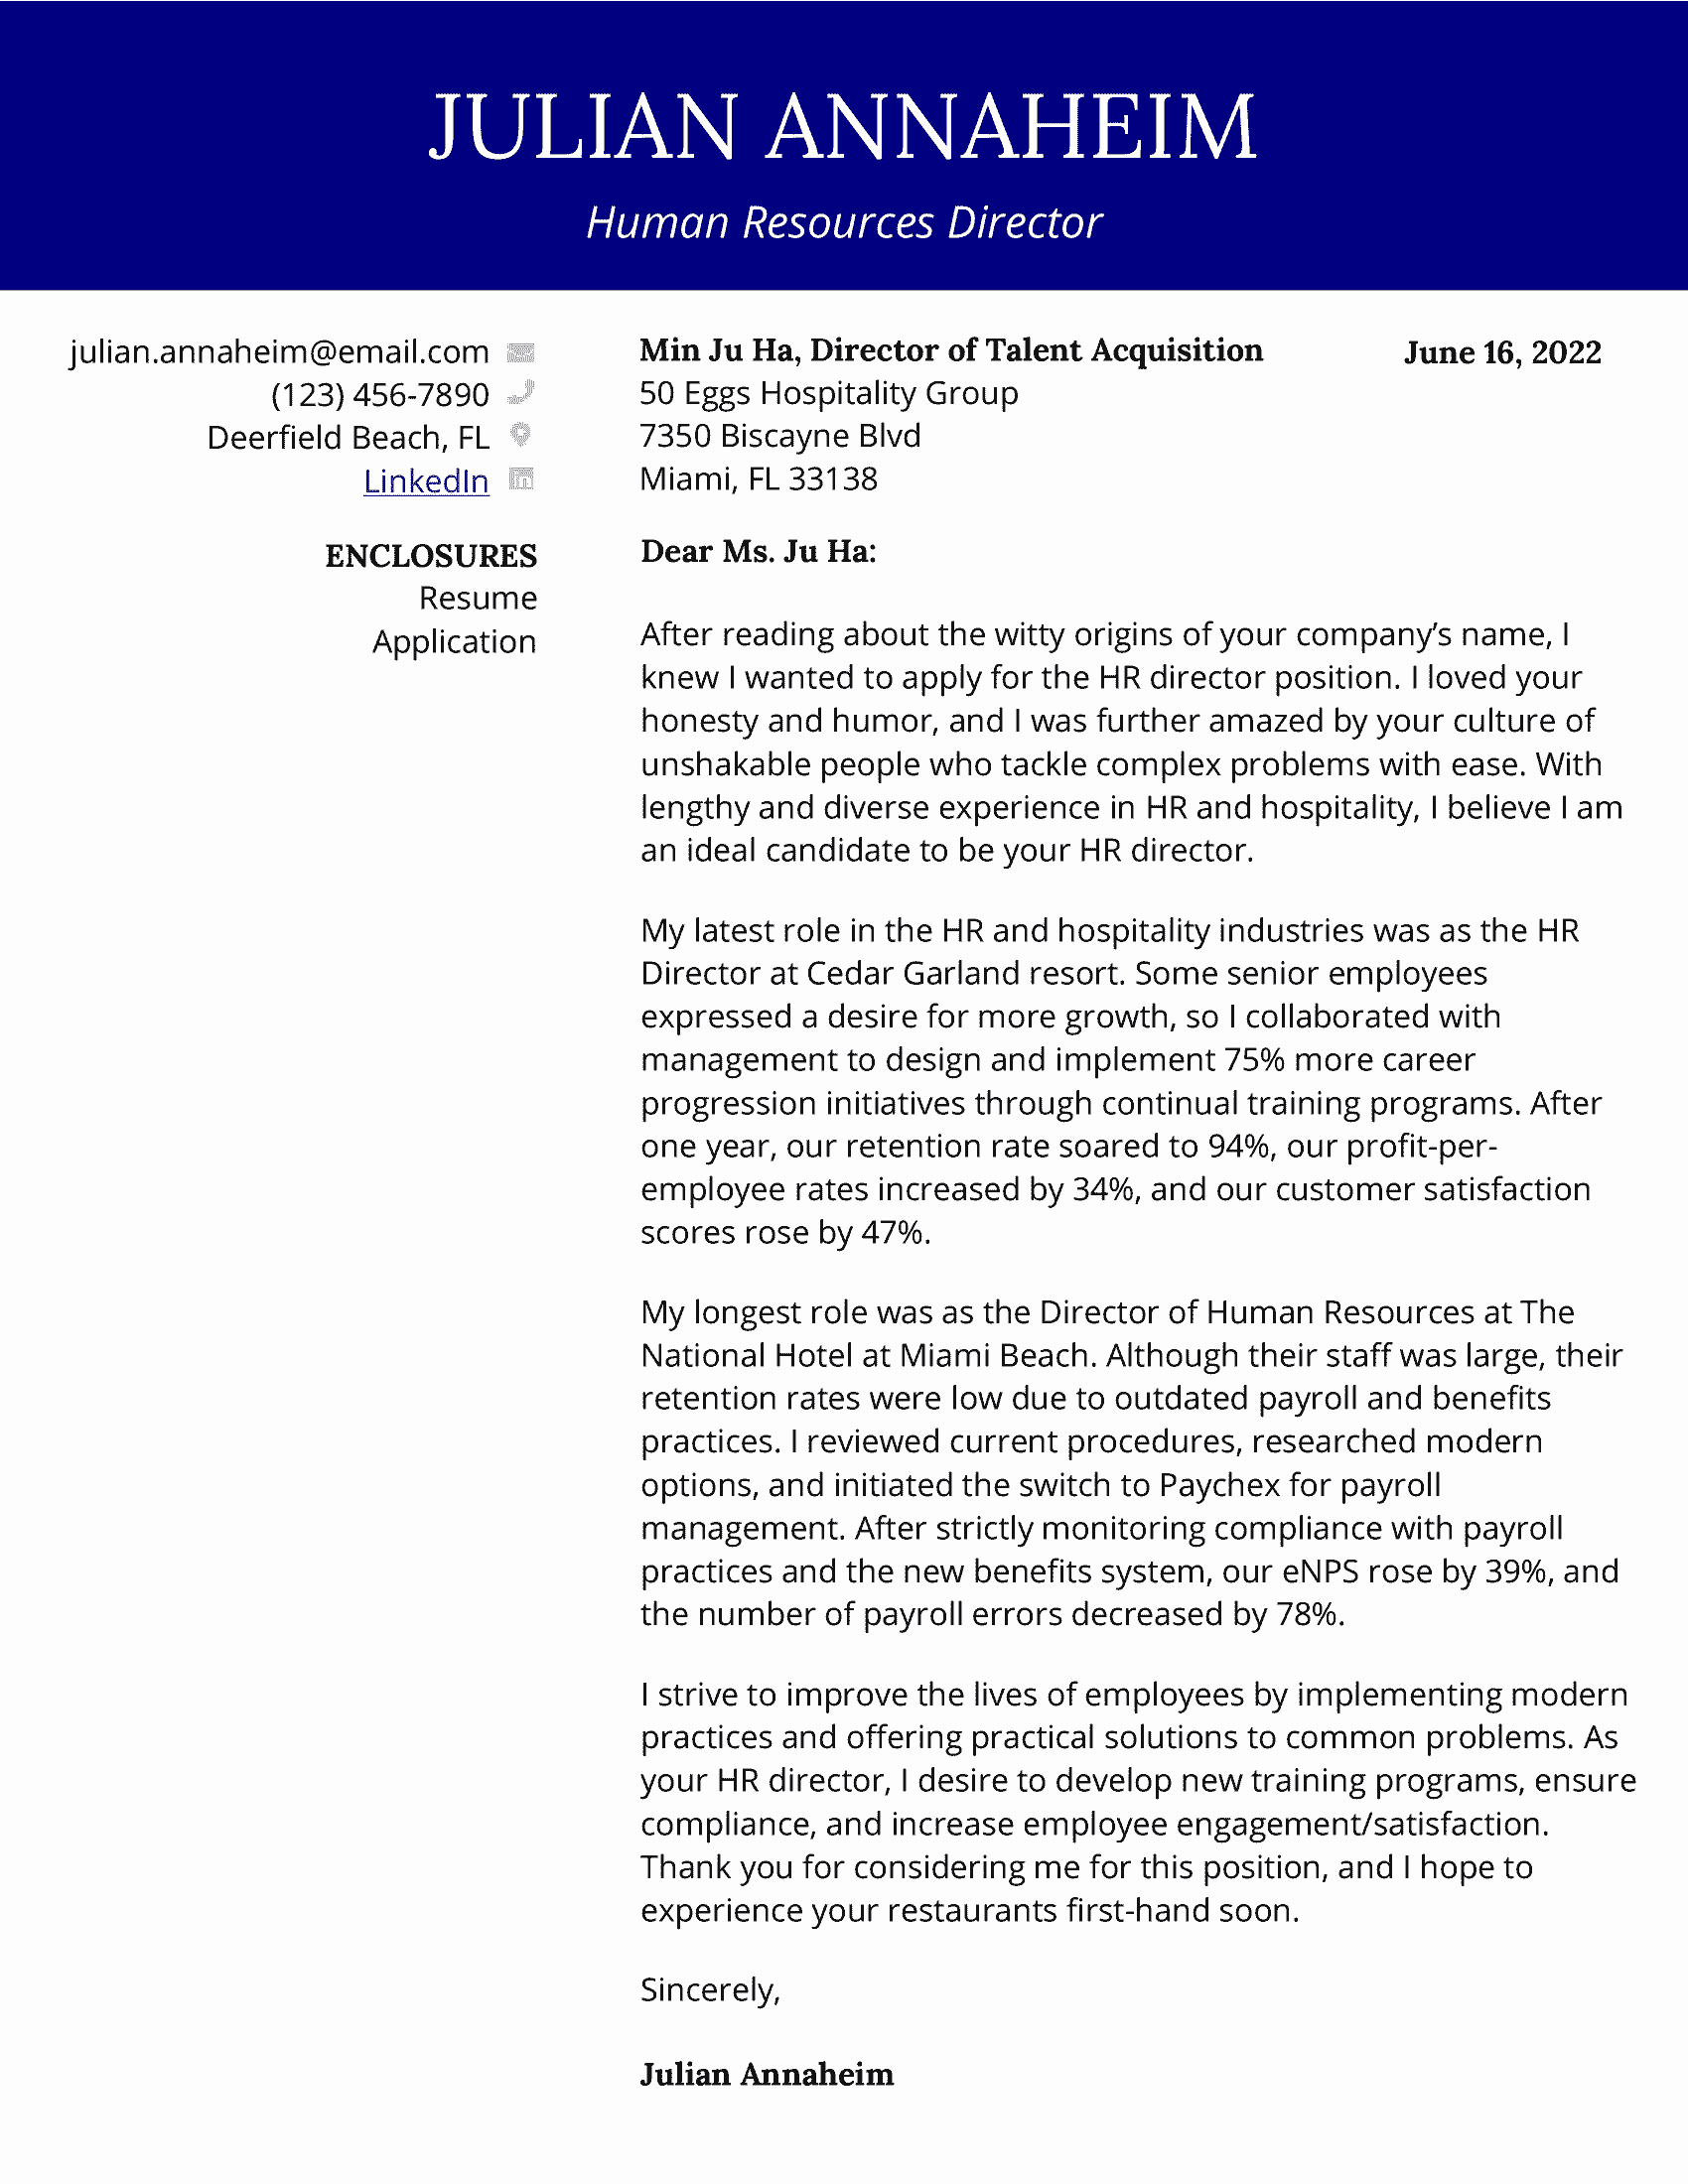 Human resources director cover letter example with blue contact header